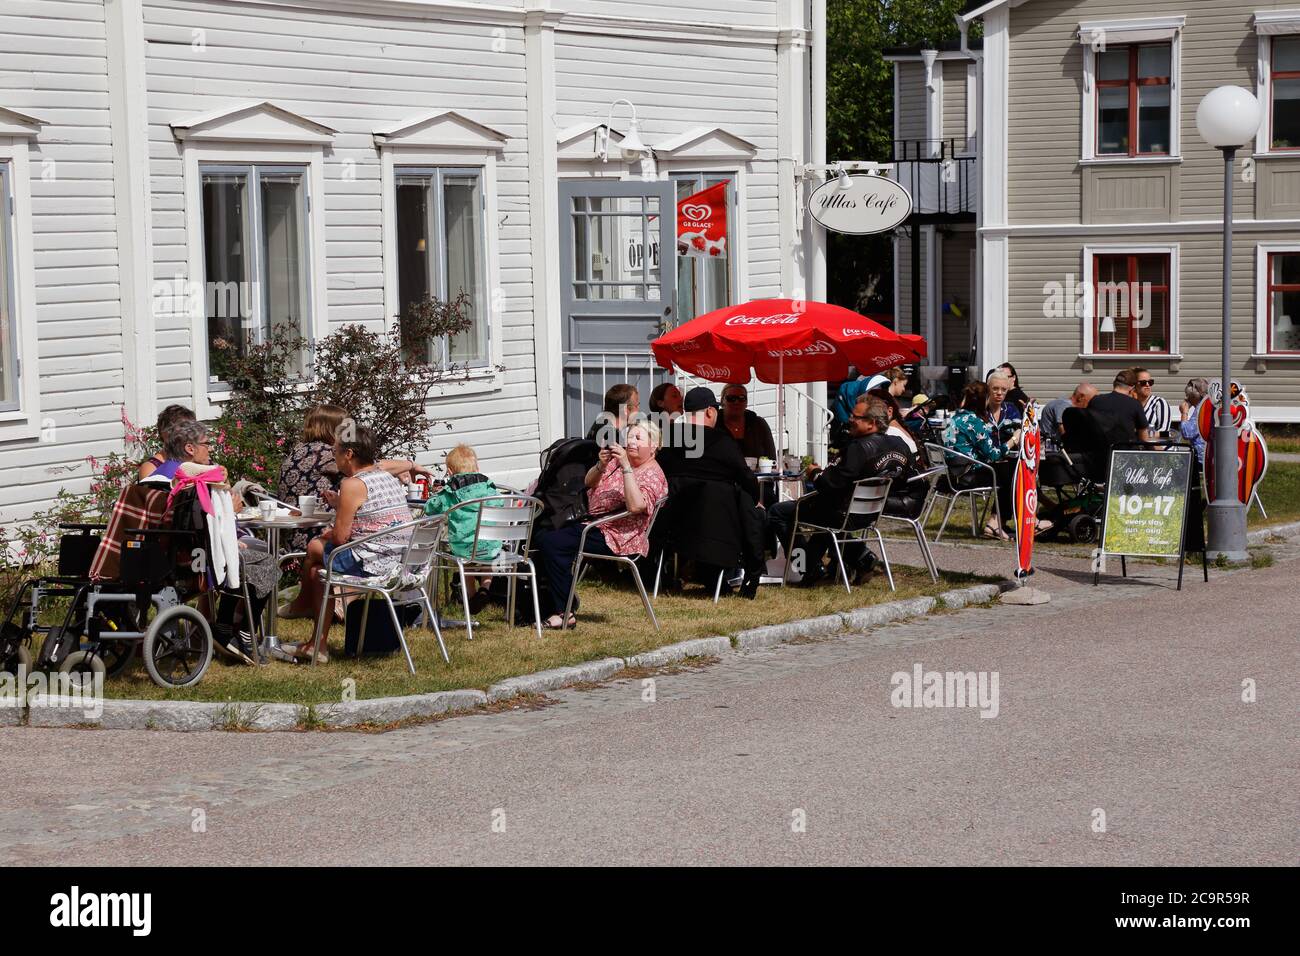 Gammelstad, Sweden - June 16, 2018: Outdoor seating at the Ullas cafe. Stock Photo